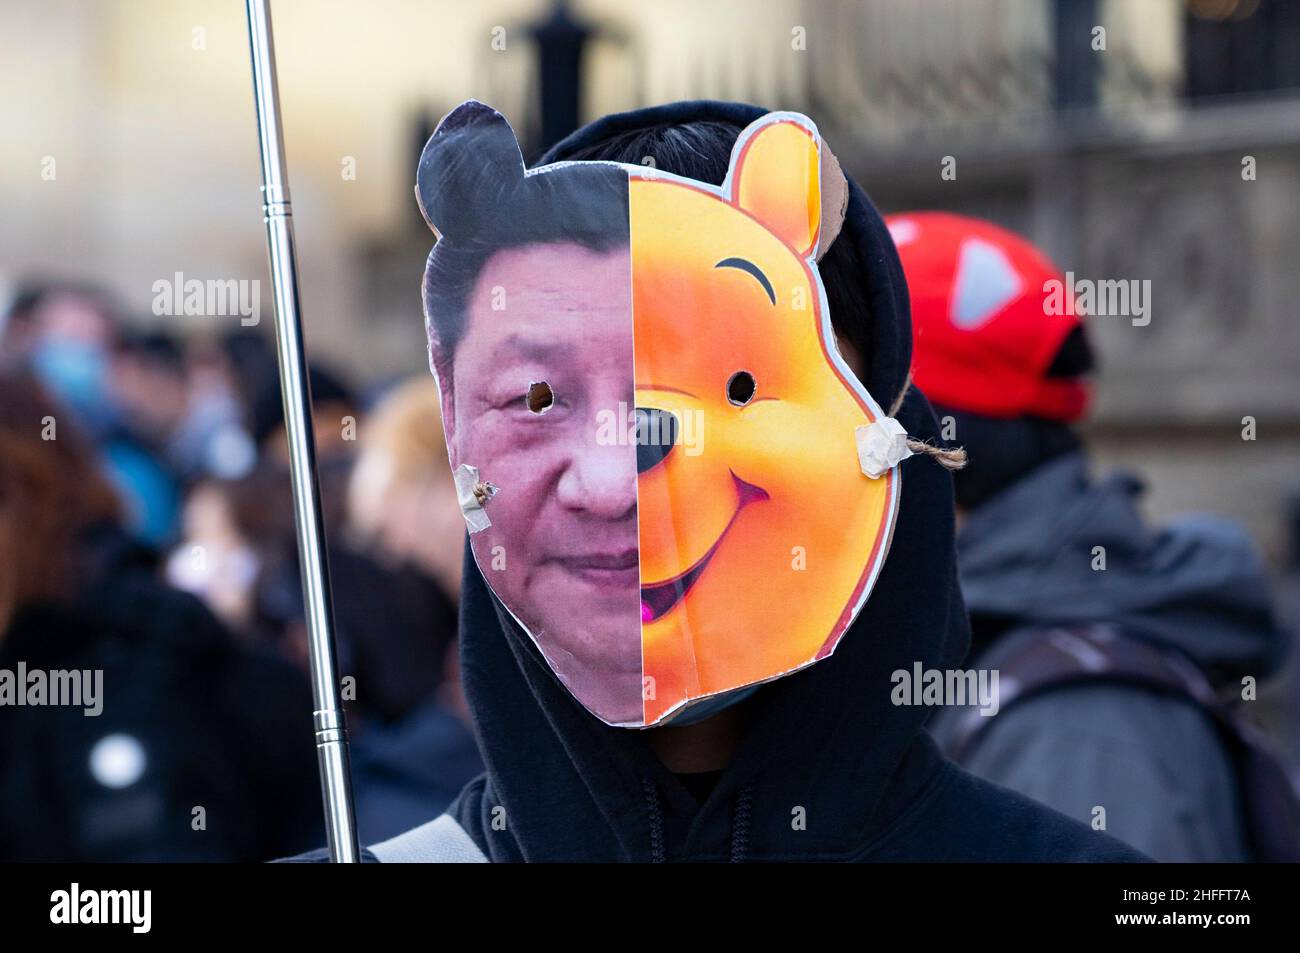 Edinburgh, Scotland, UK. 16th Jan, 2022. Hong Kong people stage pro democracy demonstration on Princes Street in Edinburgh and formed a human chain on adjacent streets. Protesters were demonstrating against the removal of freedoms and democracy under new National Security laws in Hong Kong which severely limits press freedoms. Pic; protester wears a mask with Winnie th poo and Xi jinping. Credit: Iain Masterton/Alamy Live News Stock Photo